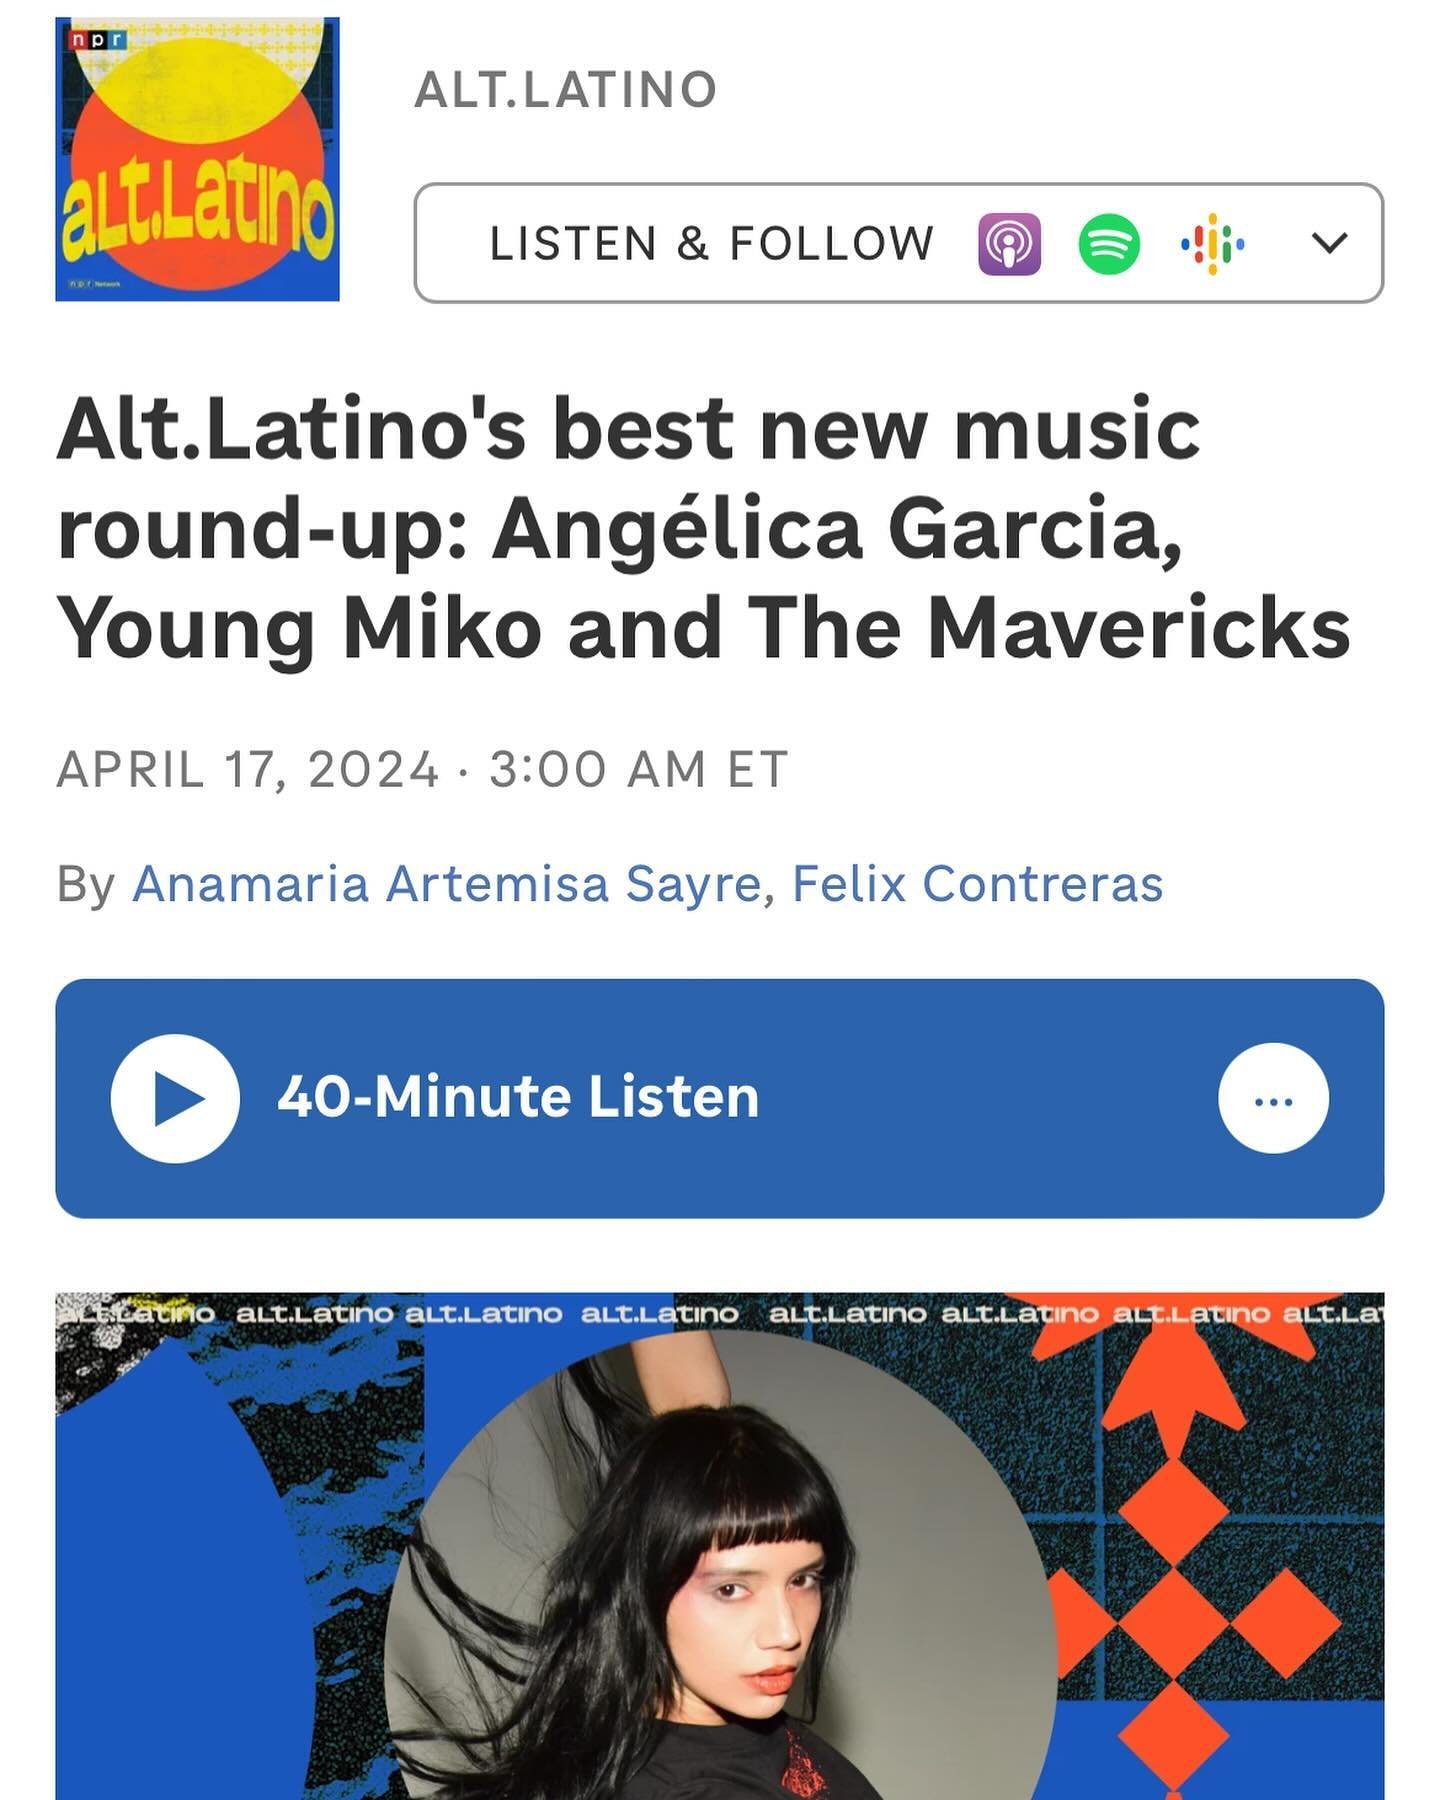 Thanks once again to our friends over at NPR Alt.Latino @nprmusic for featuring &lsquo;Moon &amp; Stars&rsquo; on their New Music Picks podcast last week! 🎧 

Head to npr.org or hit the link in our story now to hear @tiofelixc &amp; @anamaria.sayre 